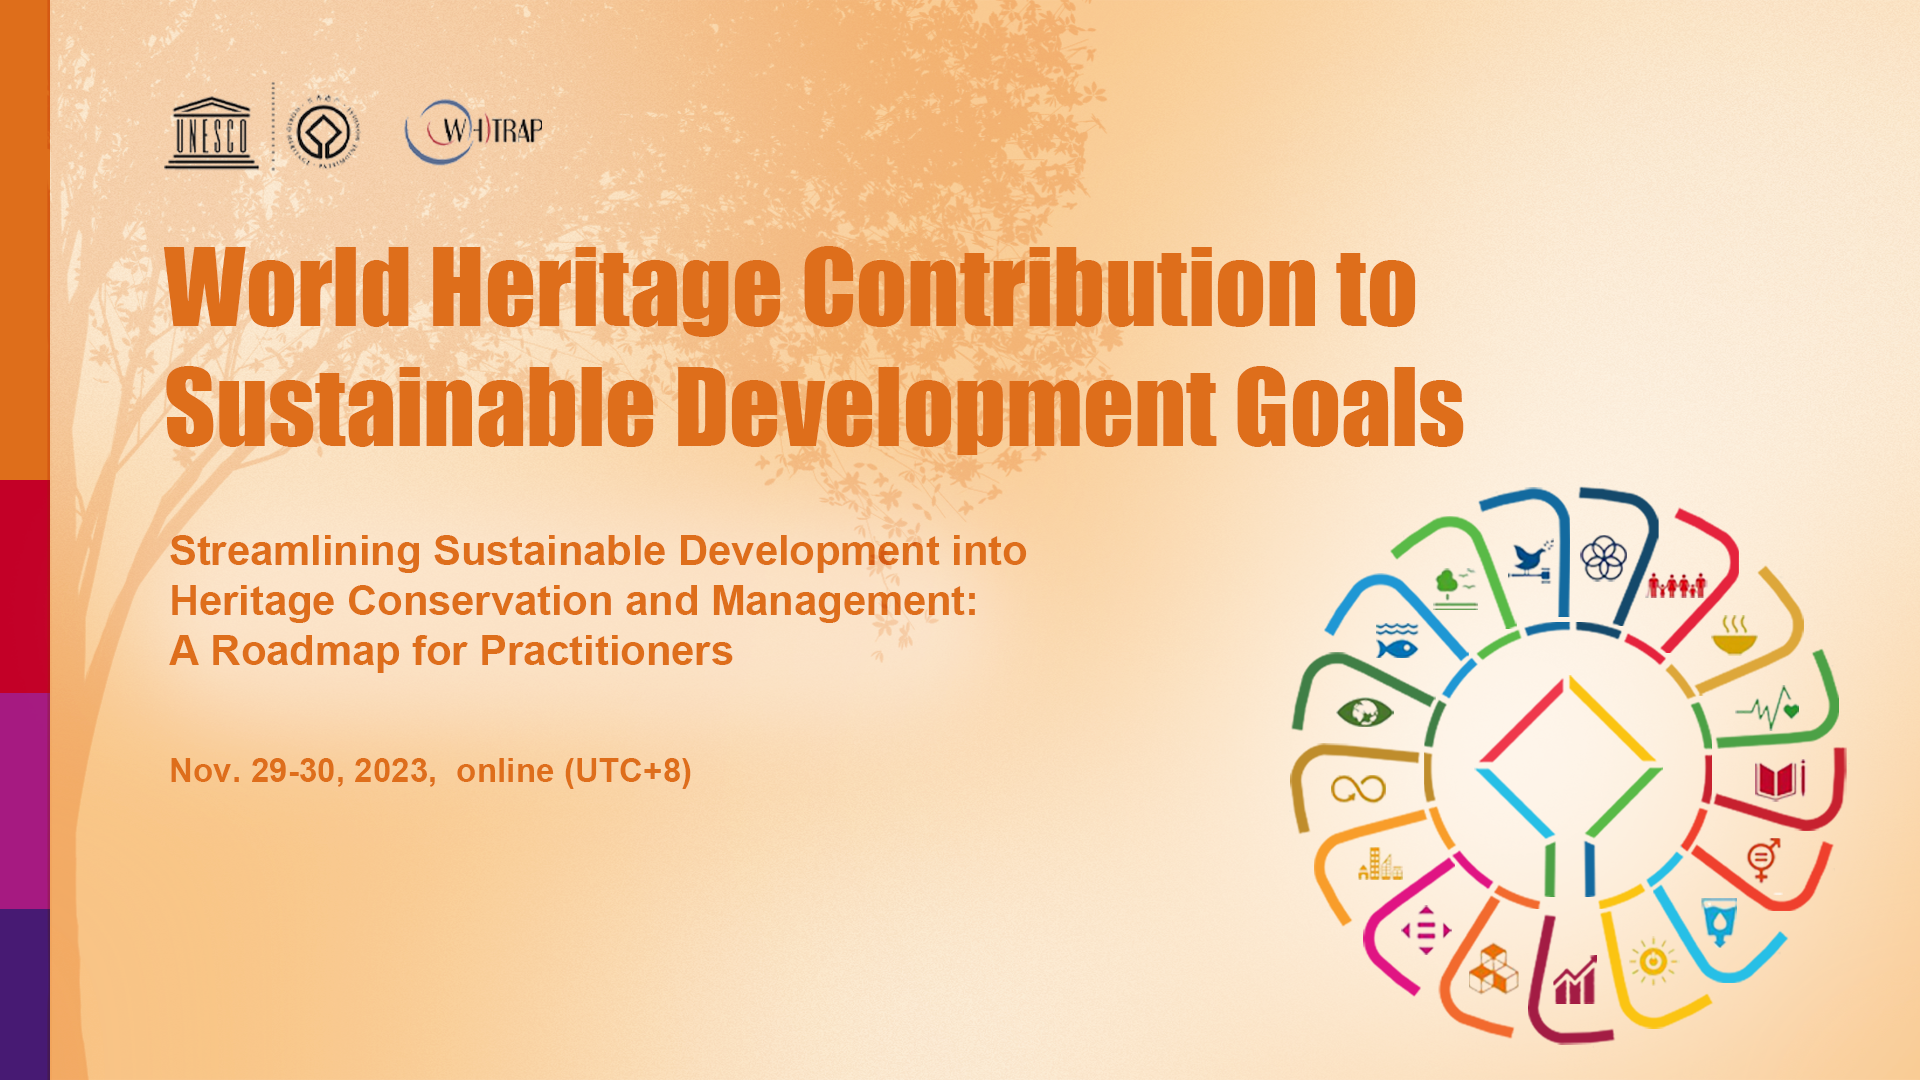 Promotion | Series of HeritAP Annual Meetings on World Heritage Contribution to Sustainable Development Goals Streamlining Sustainable Development into Heritage Conservation and Management: A Roadmap for Practitioners